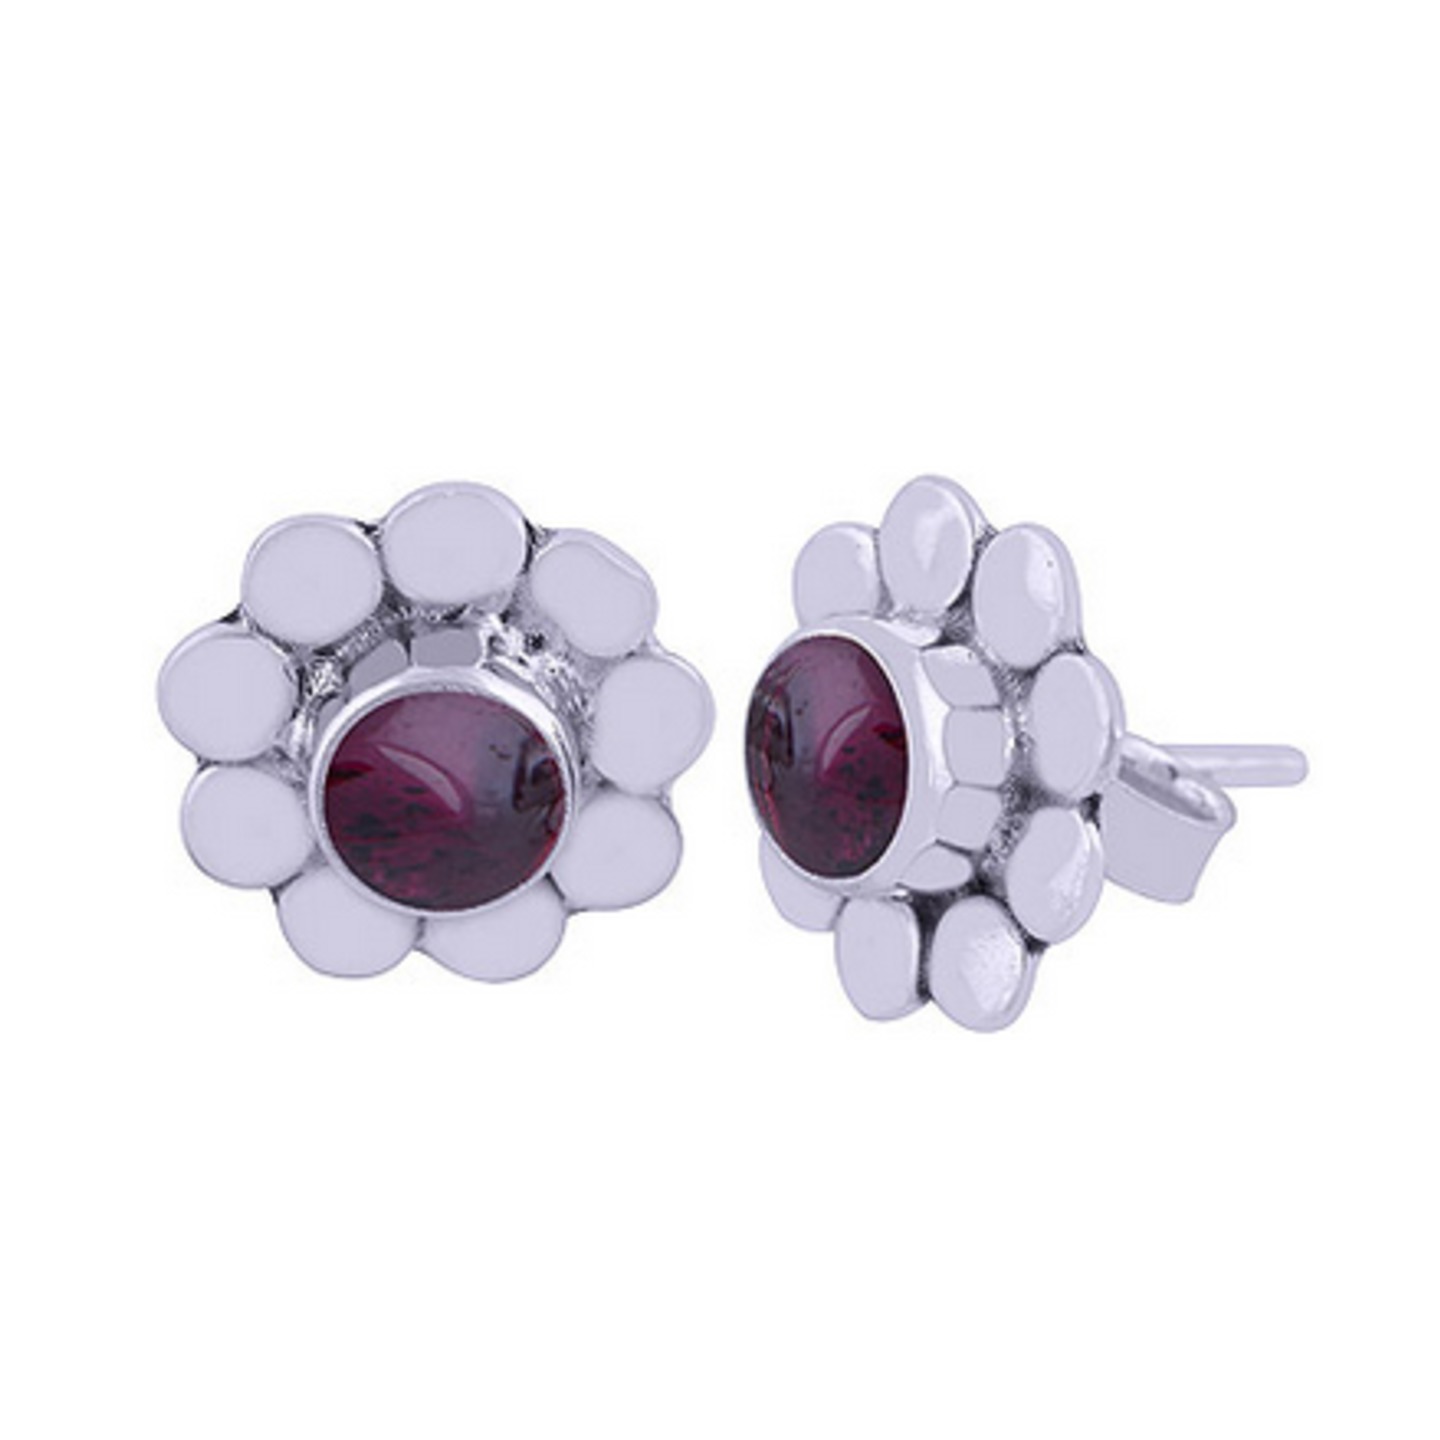 The Pompon Silver Studs